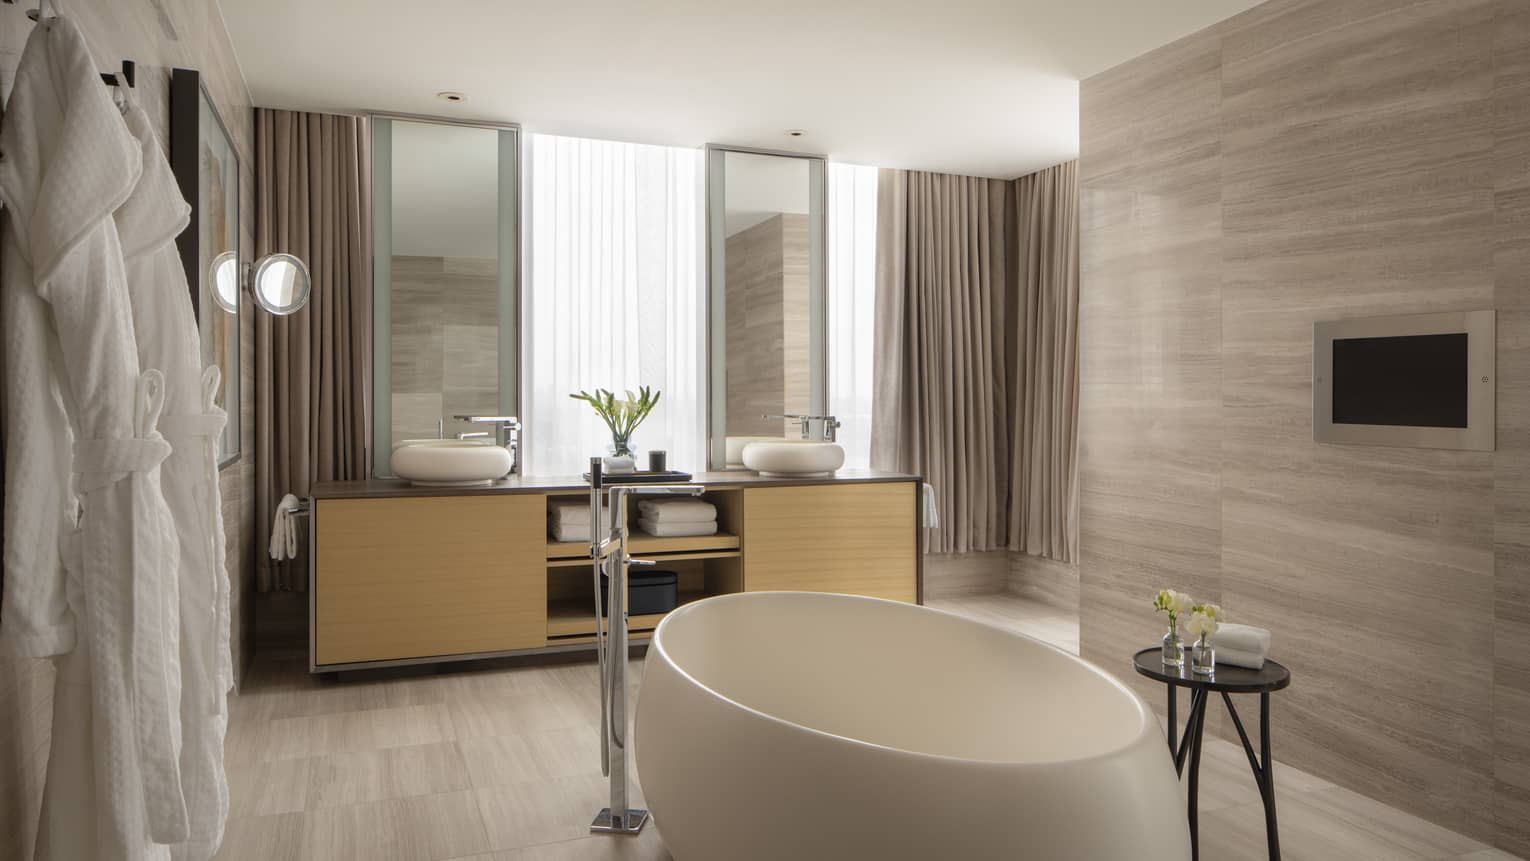 Presidential Suite bathroom with standalone luxury tub at Four Seasons Hotel Toronto